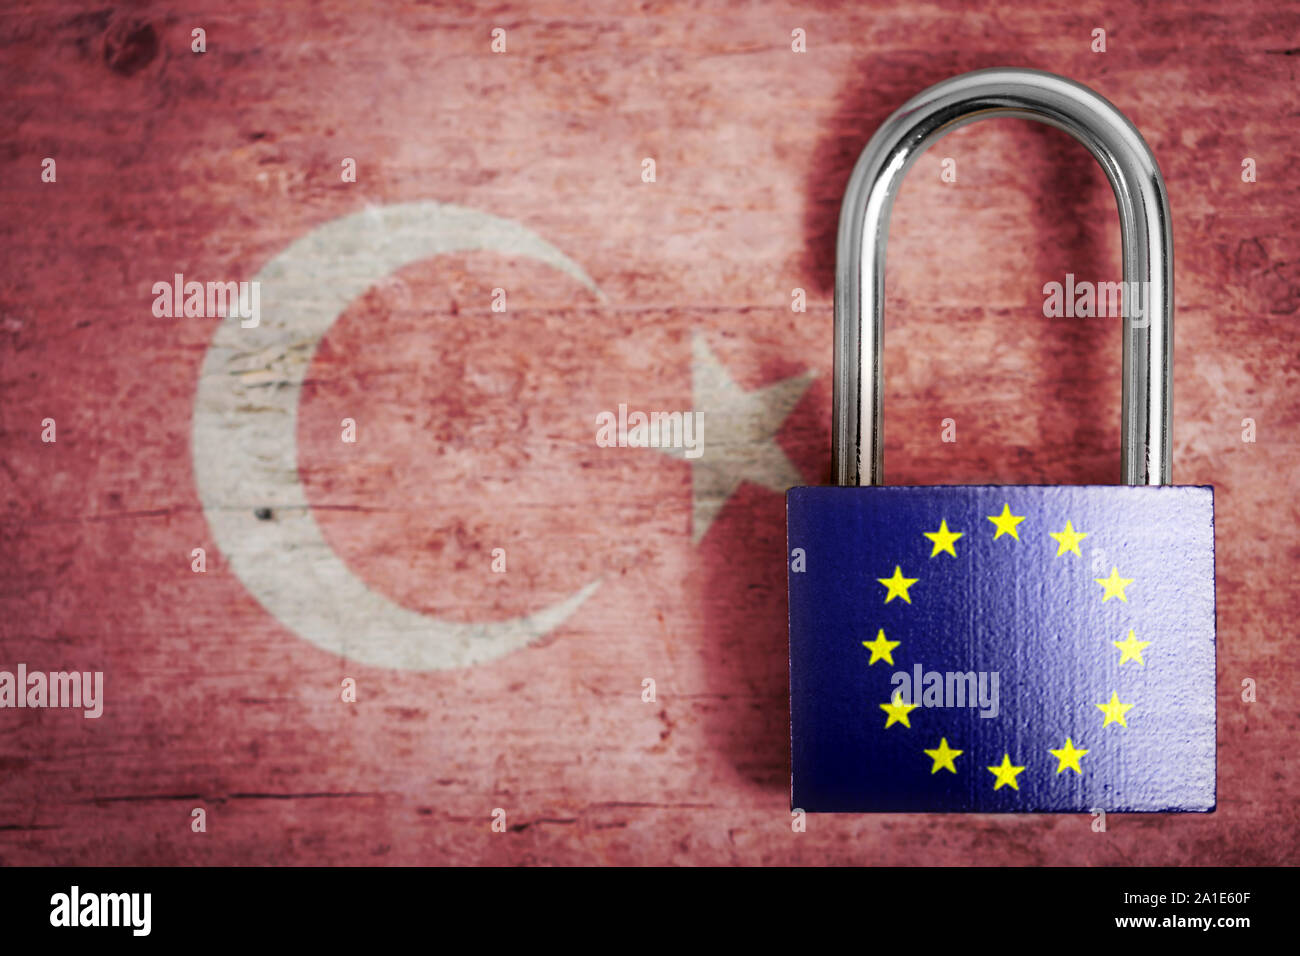 locked padlock with flag of european union in front of a wooden background with turkish flag Stock Photo